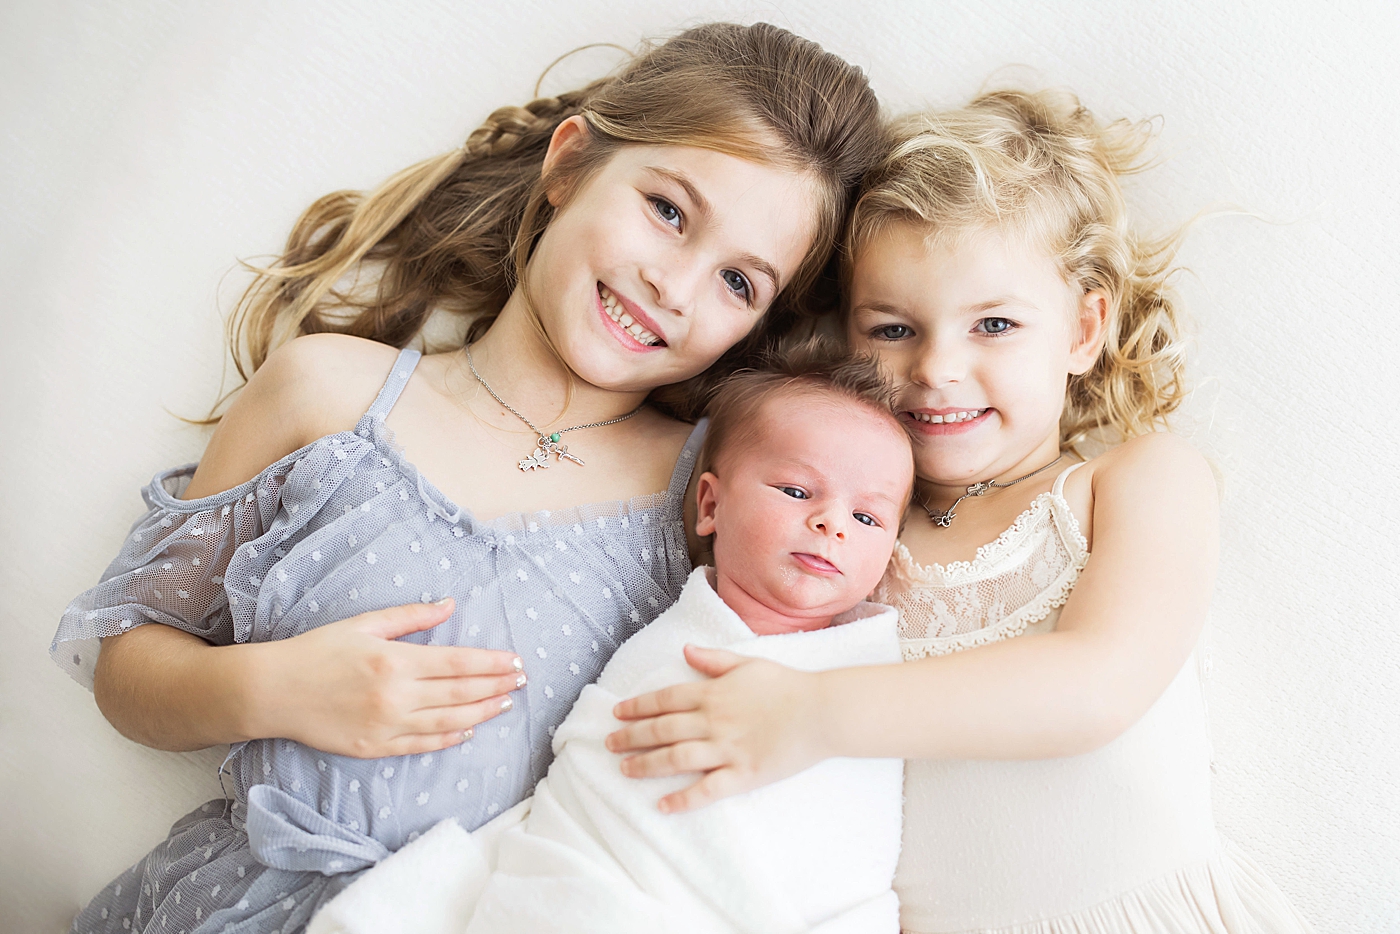 Two big sisters holding their baby brother. Photo by Fresh Light Photography.